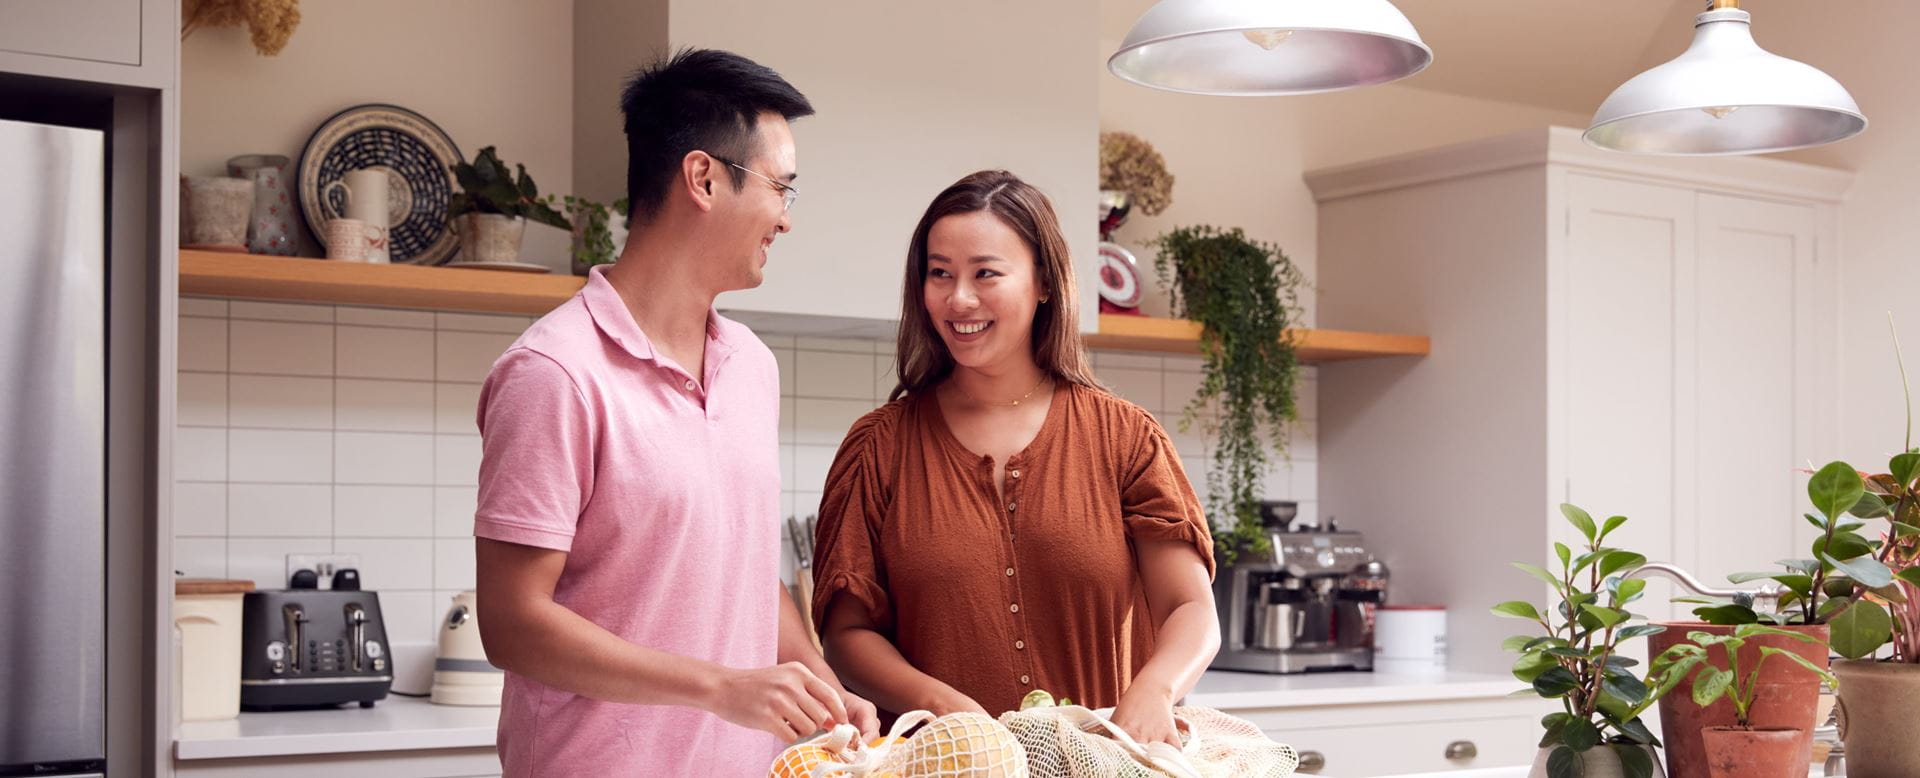 A man wearing a pink polo and a woman in an orange shirt standing in the kitchen